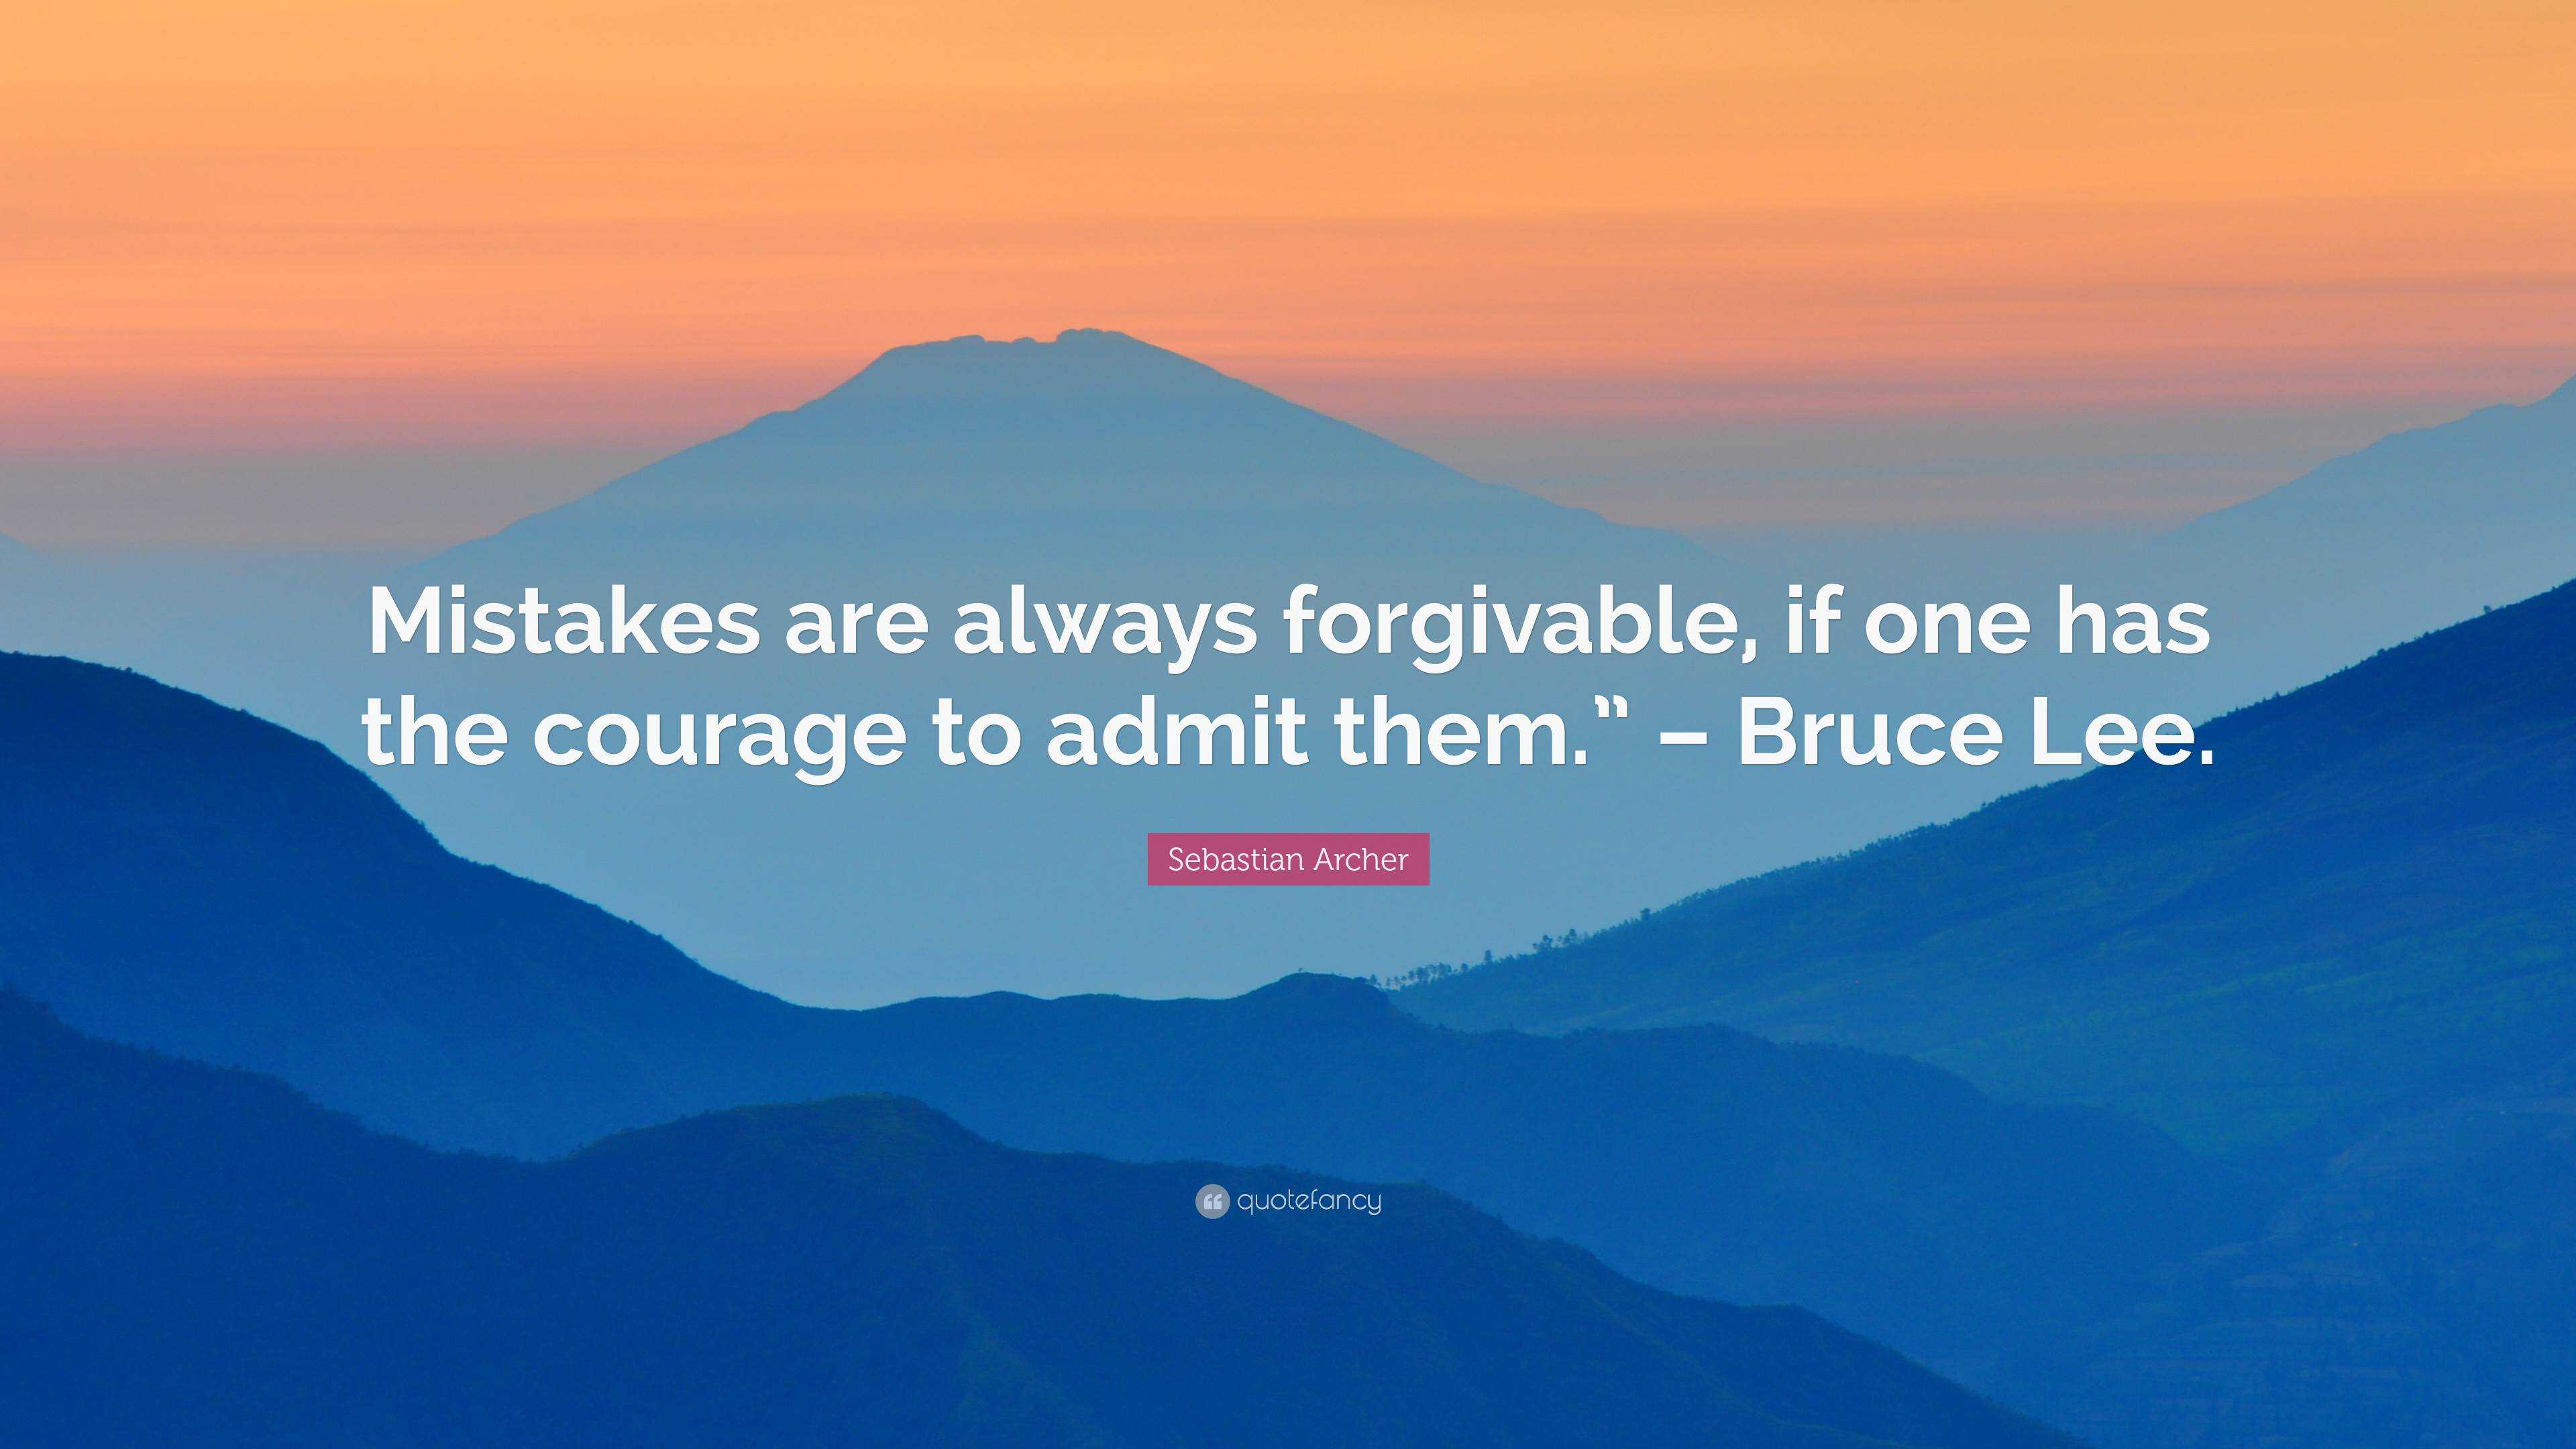 Sebastian Archer Quote Mistakes Are Always Forgivable If One Has The Courage To Admit Them